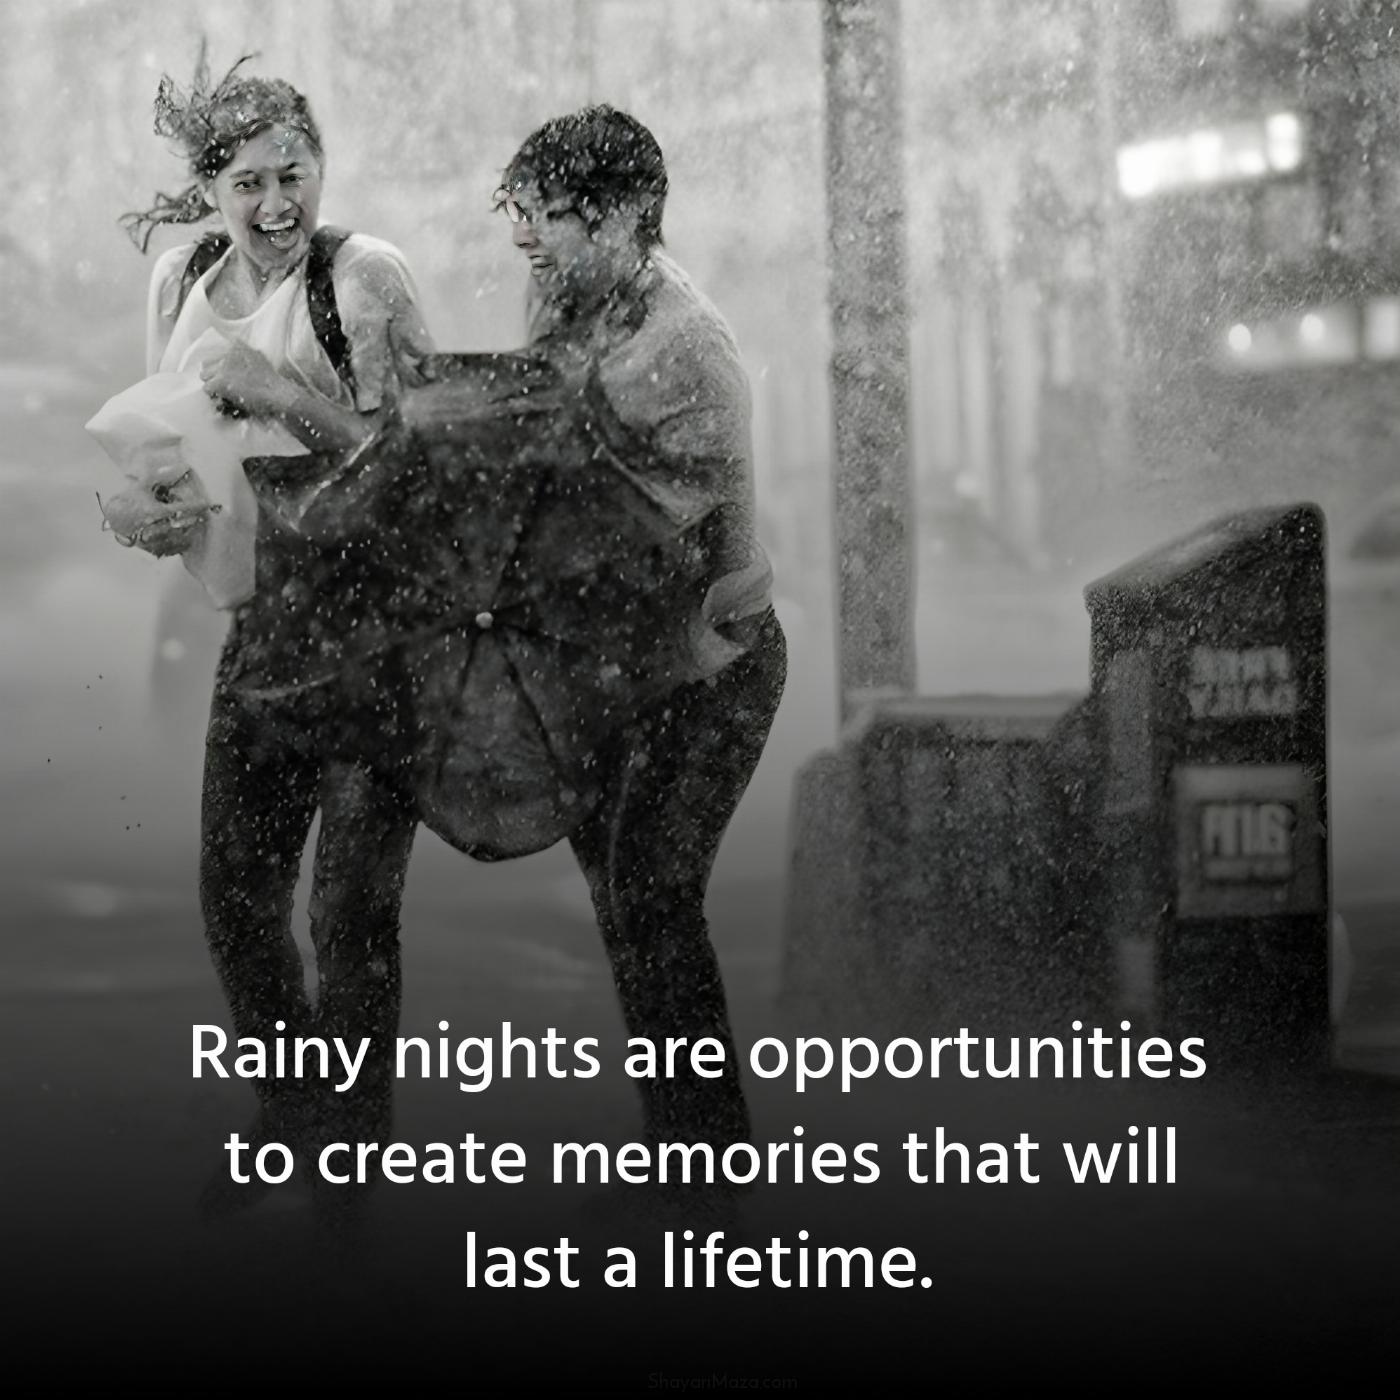 Rainy nights are opportunities to create memories